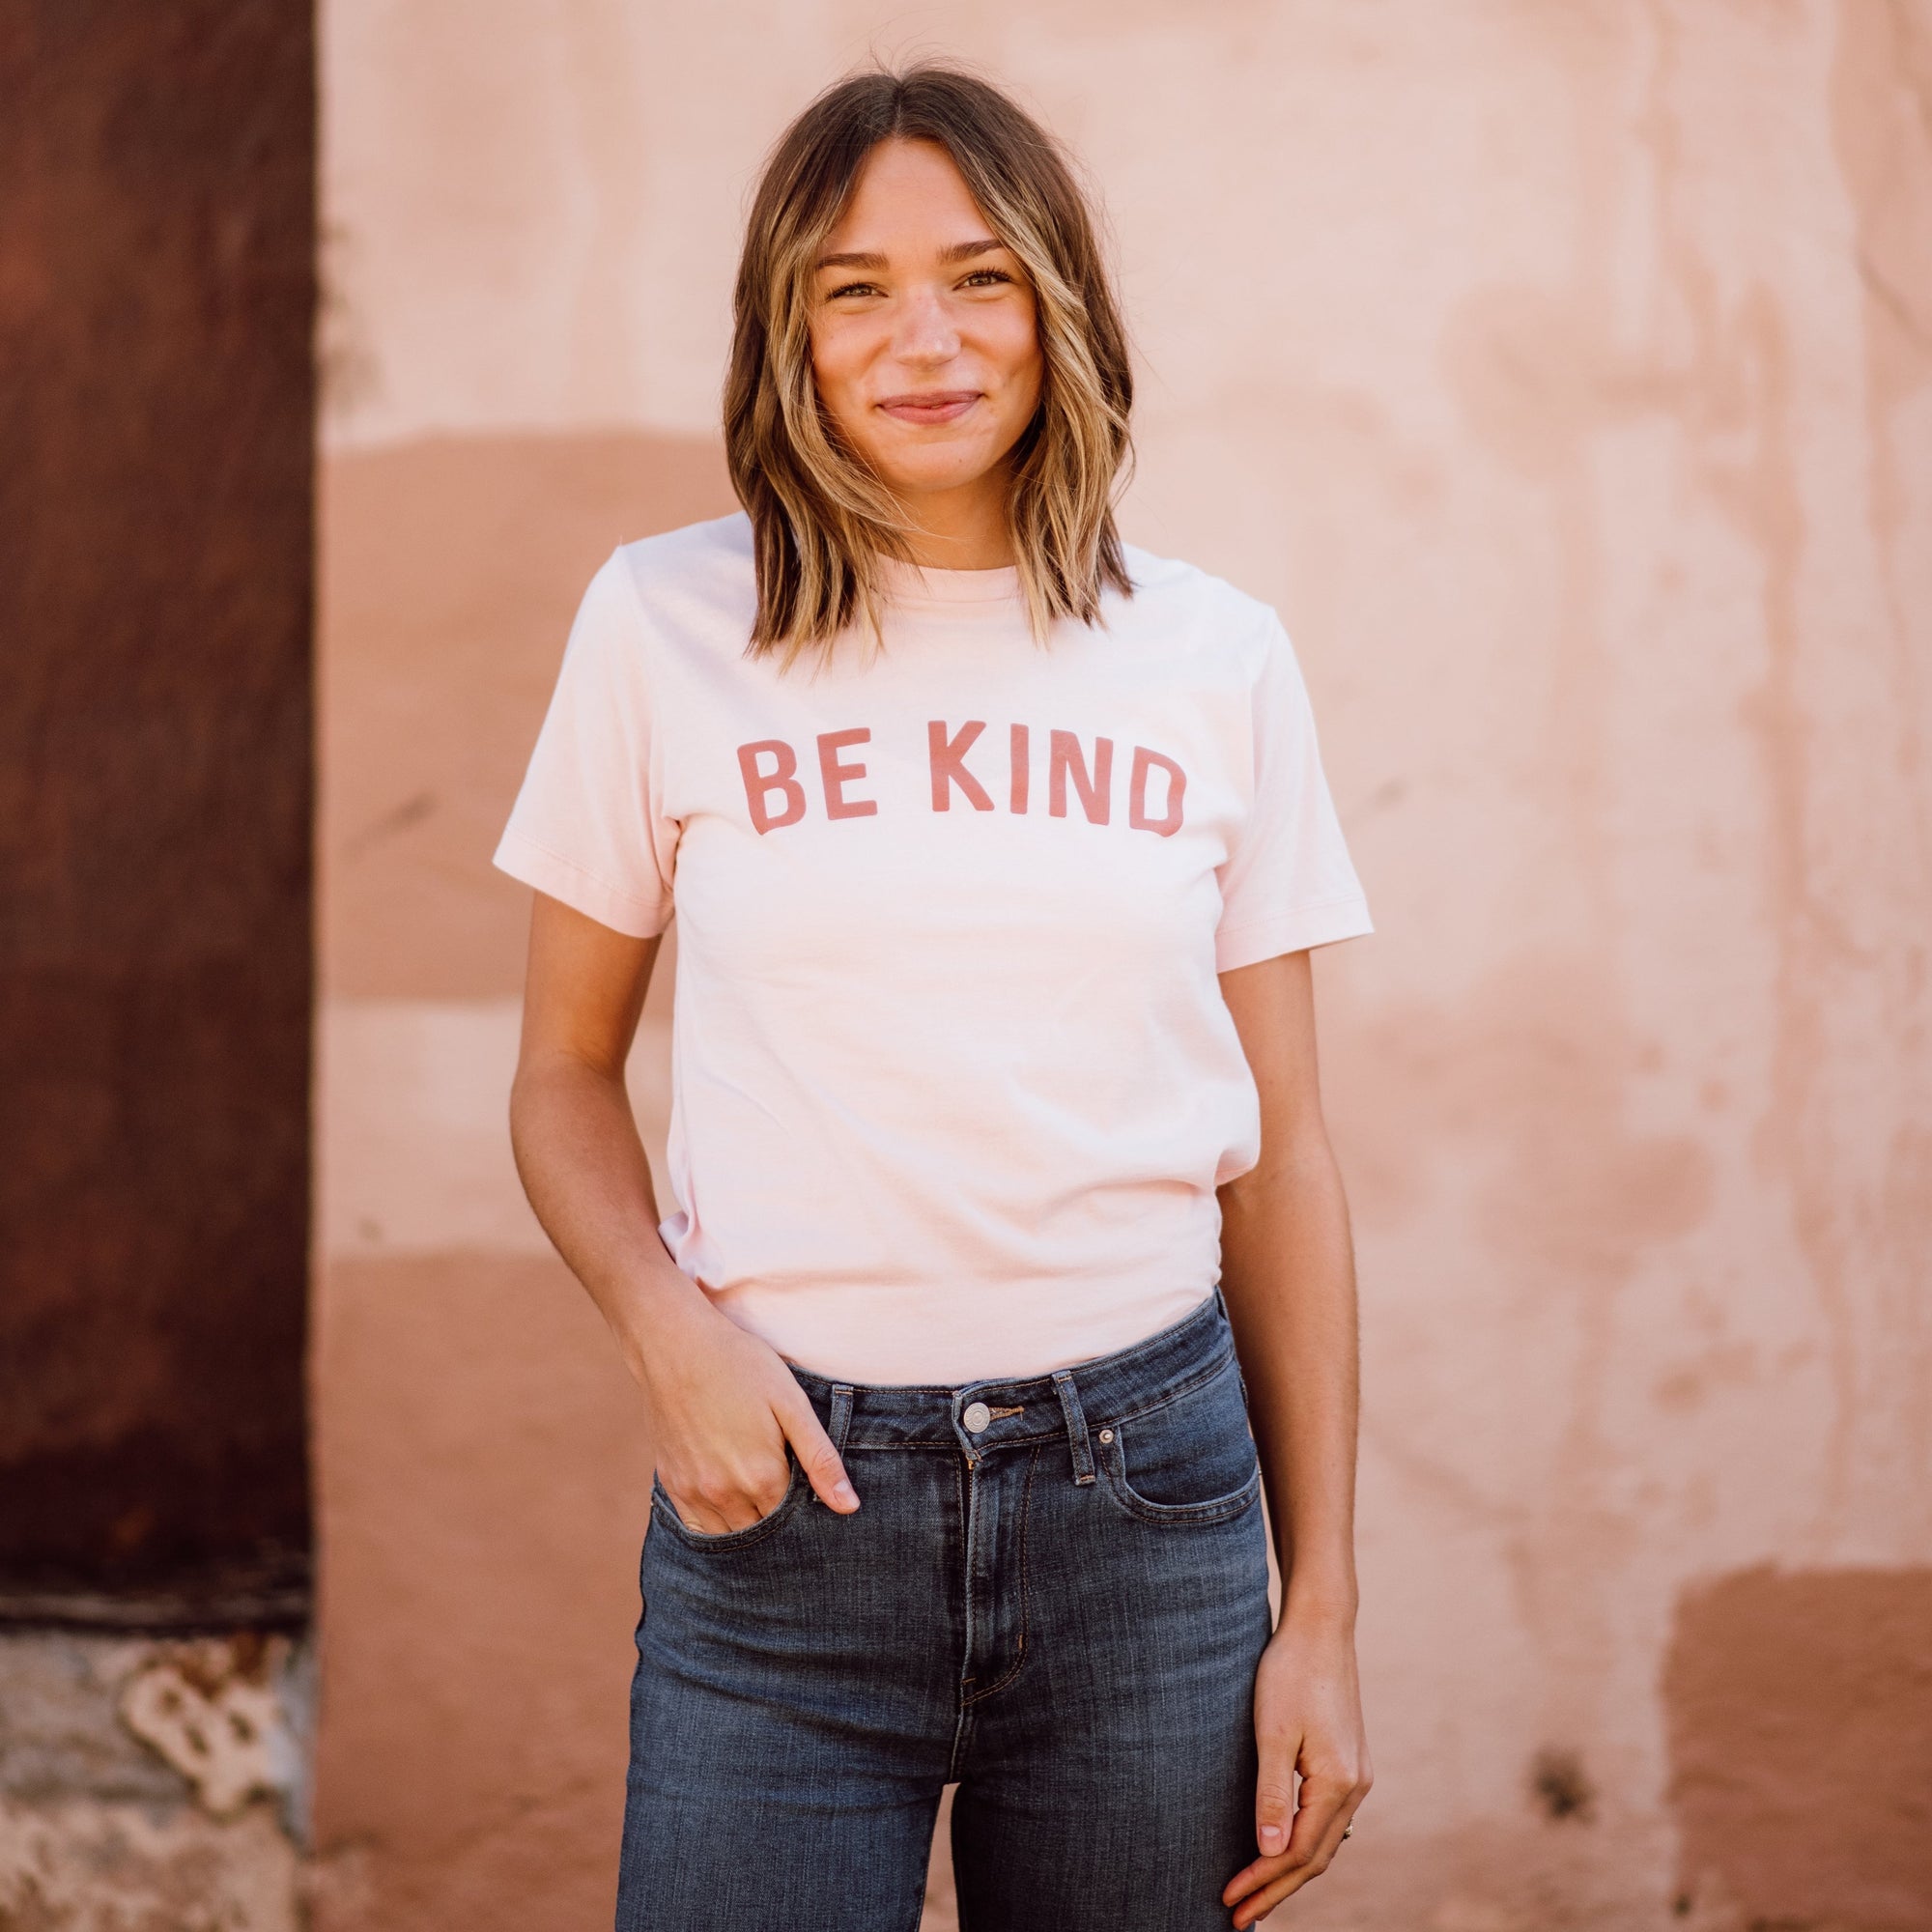 Be Kind Tee womens August Ink faded pink XS 